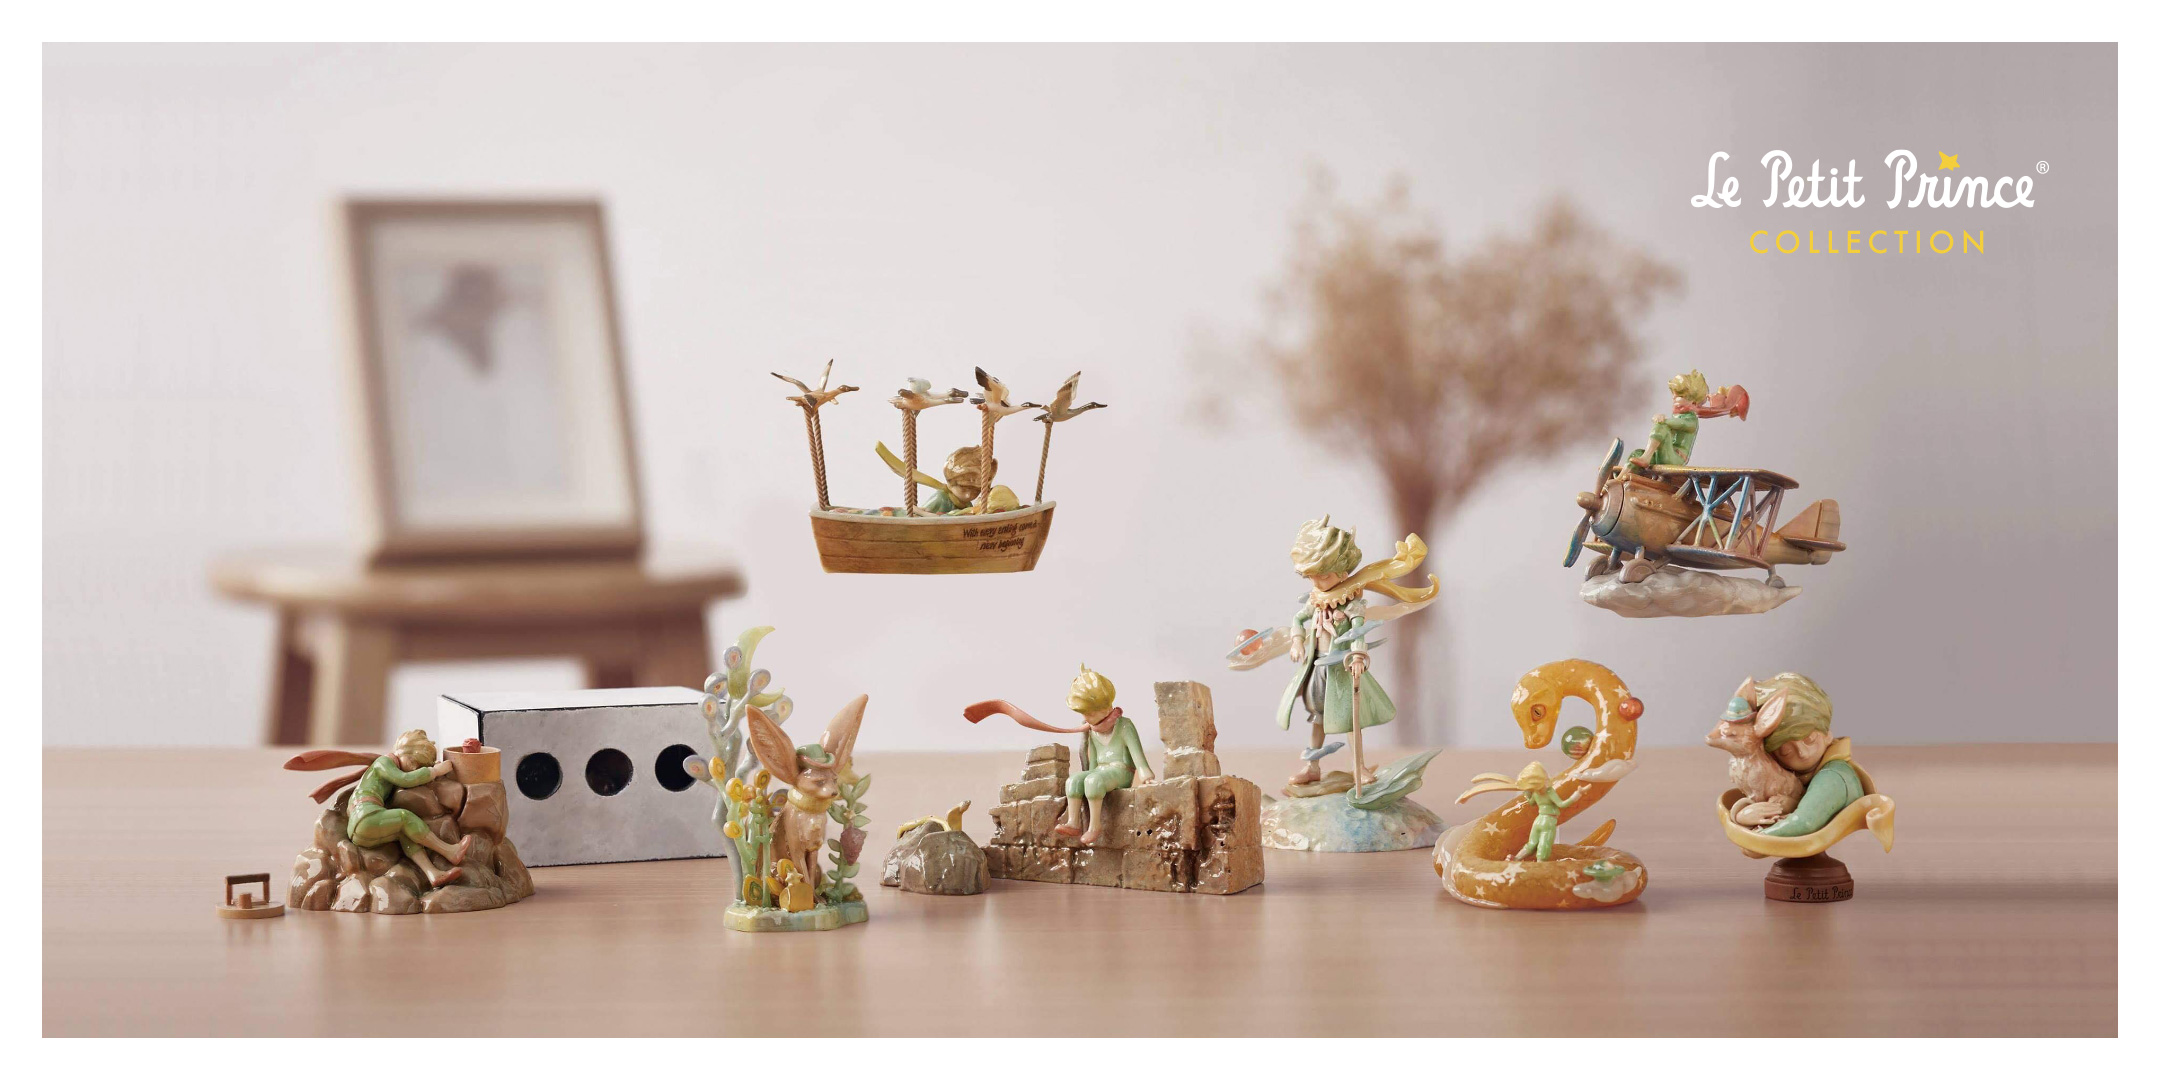 The set of 8 figurines by Steven Choi at 70% off!